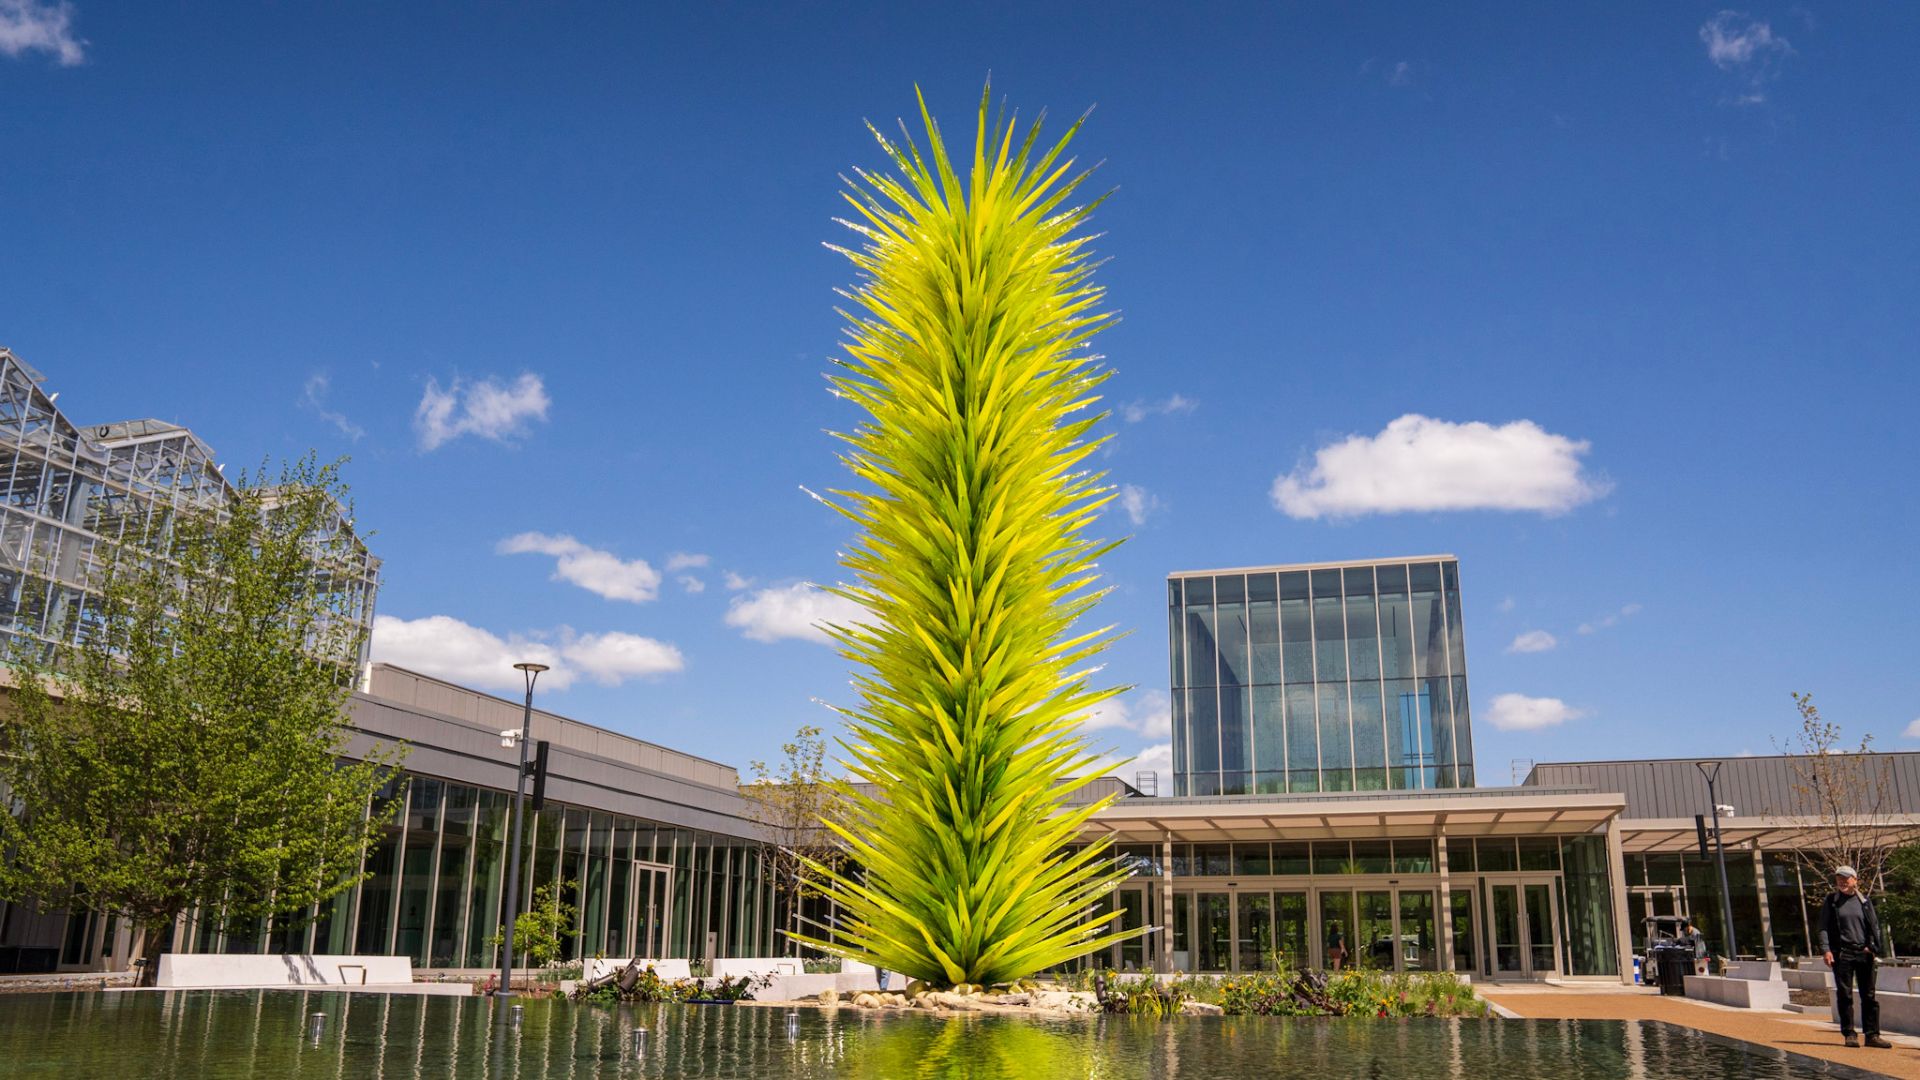 Dale Chihuly’s Lime Green Icicle Tower is the first thing that visitors to the Missouri Botanical Garden see during Chihuly in the Garden 2023.